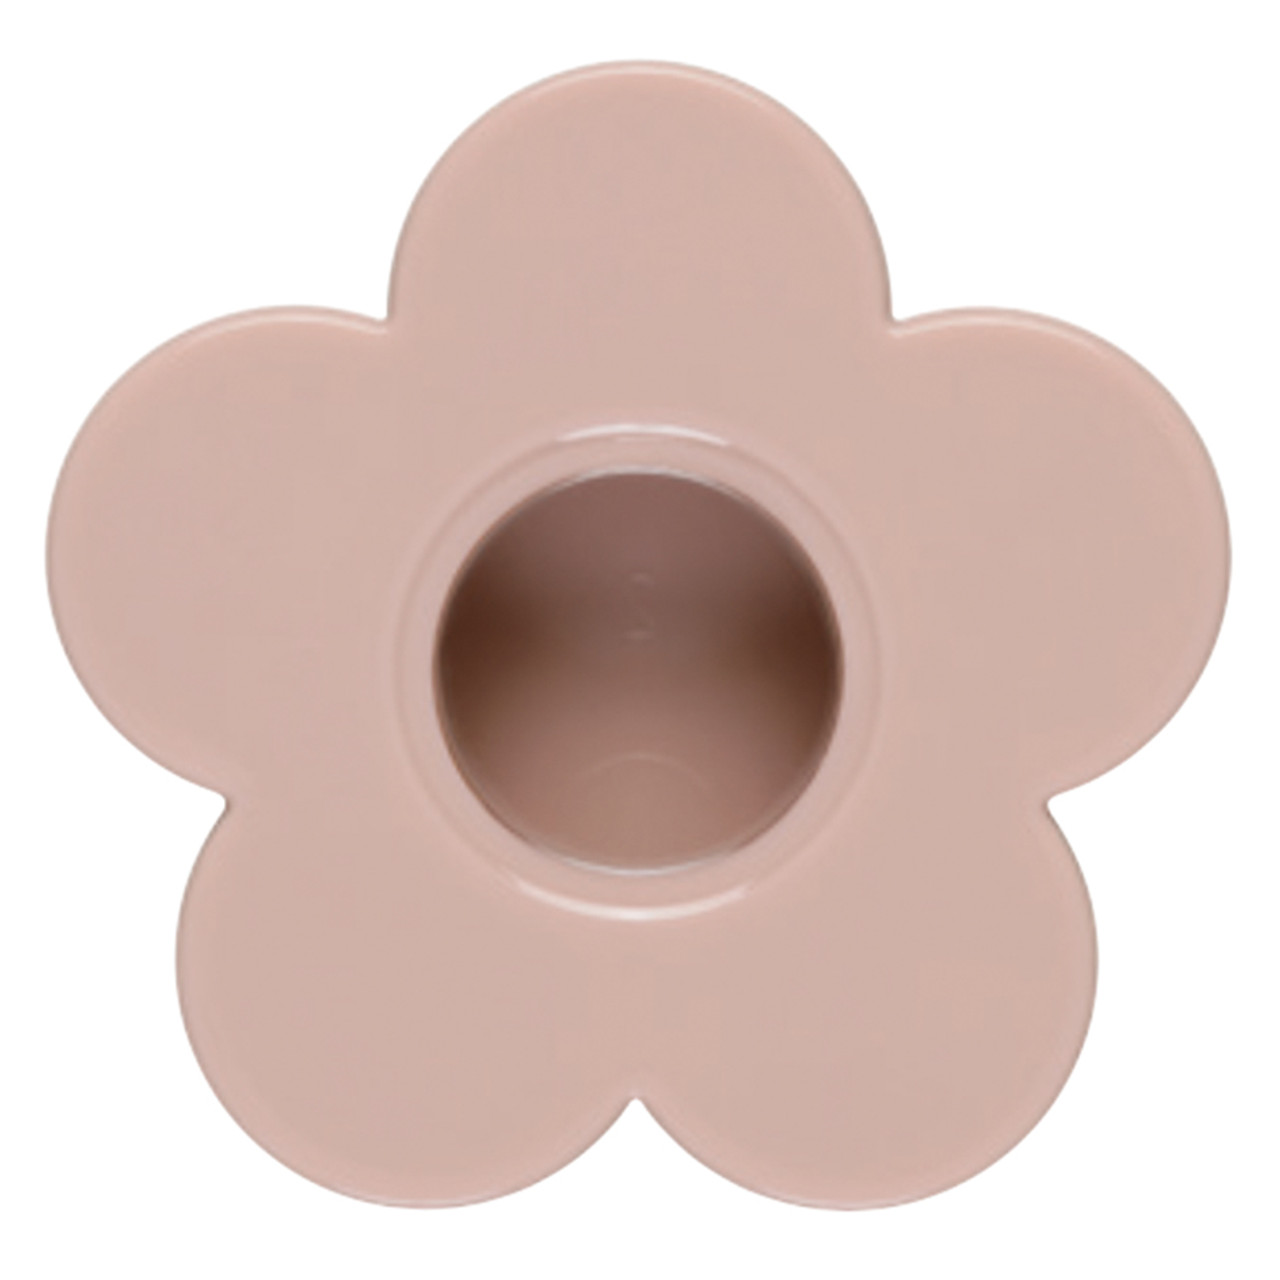 An empty, muted pink, daisy shaped case for one triangular eyeshadow. The case is closed, emphasising its cute daisy shape.